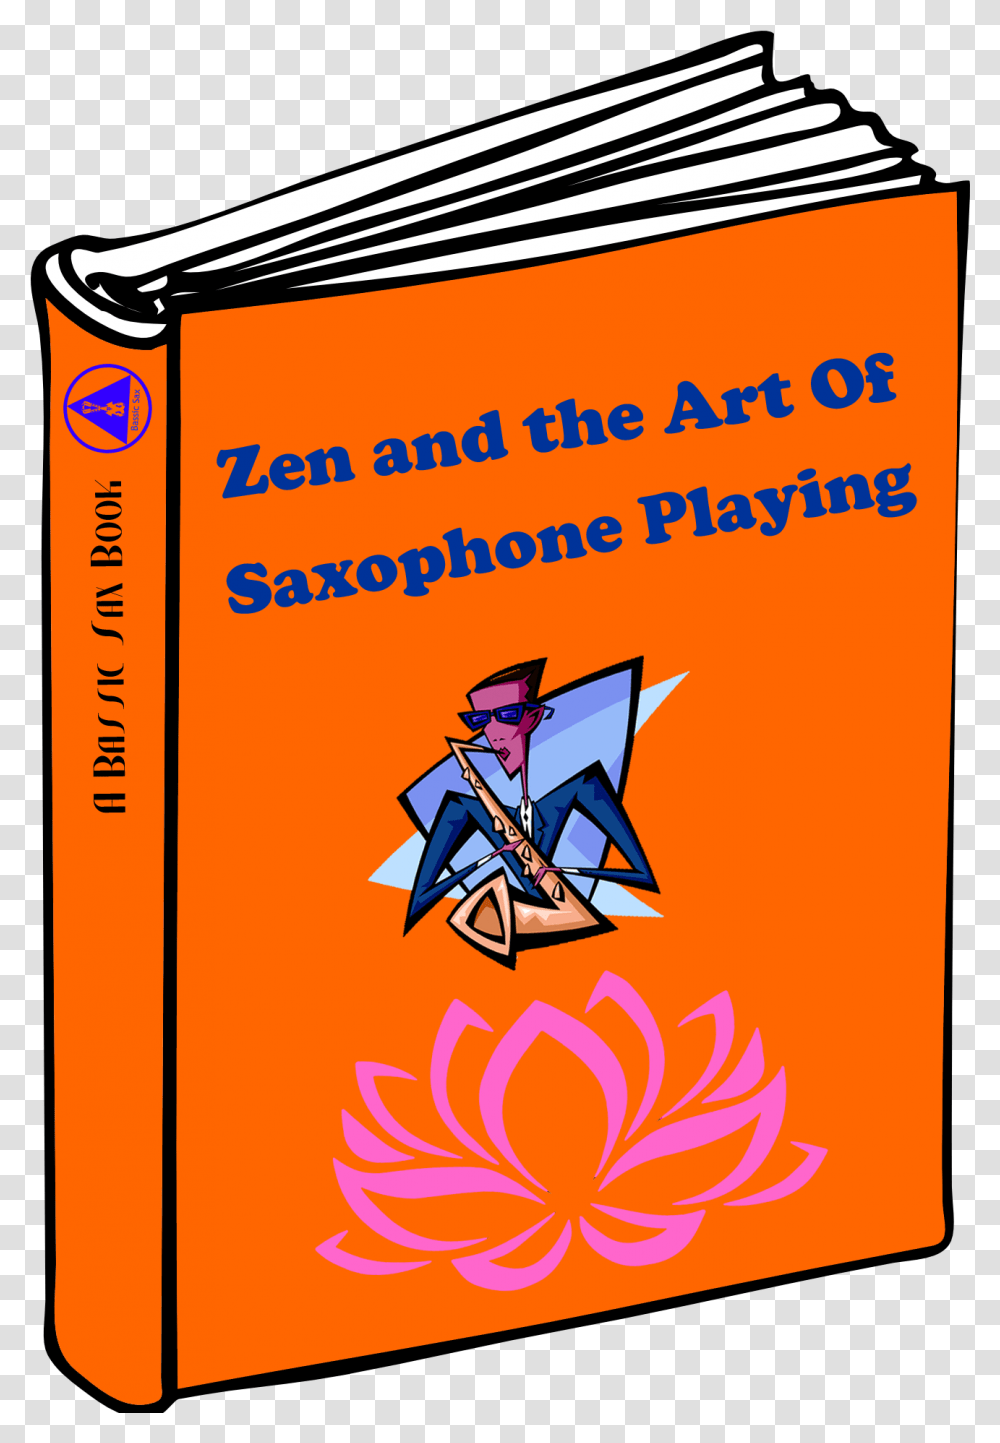 Zen And The Art Of Saxophone Playing Lotus Flower Blank Book Cover Clipart, File Binder, File Folder Transparent Png